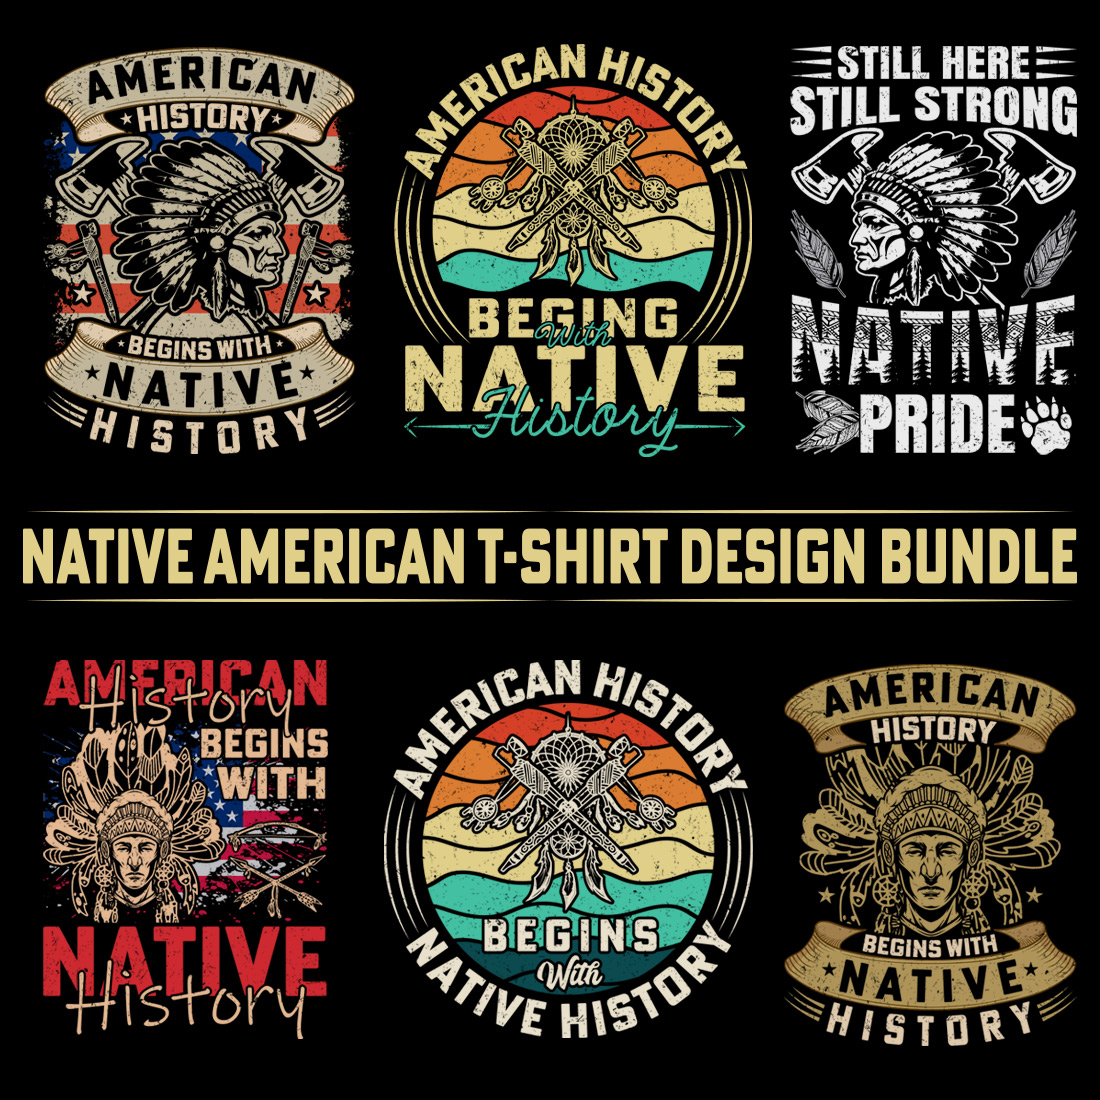 American History Begins with Native History bundle, Native American T-Shirt bundle, Native American Pride Shirts bundle, bundle t-shirt design cover image.